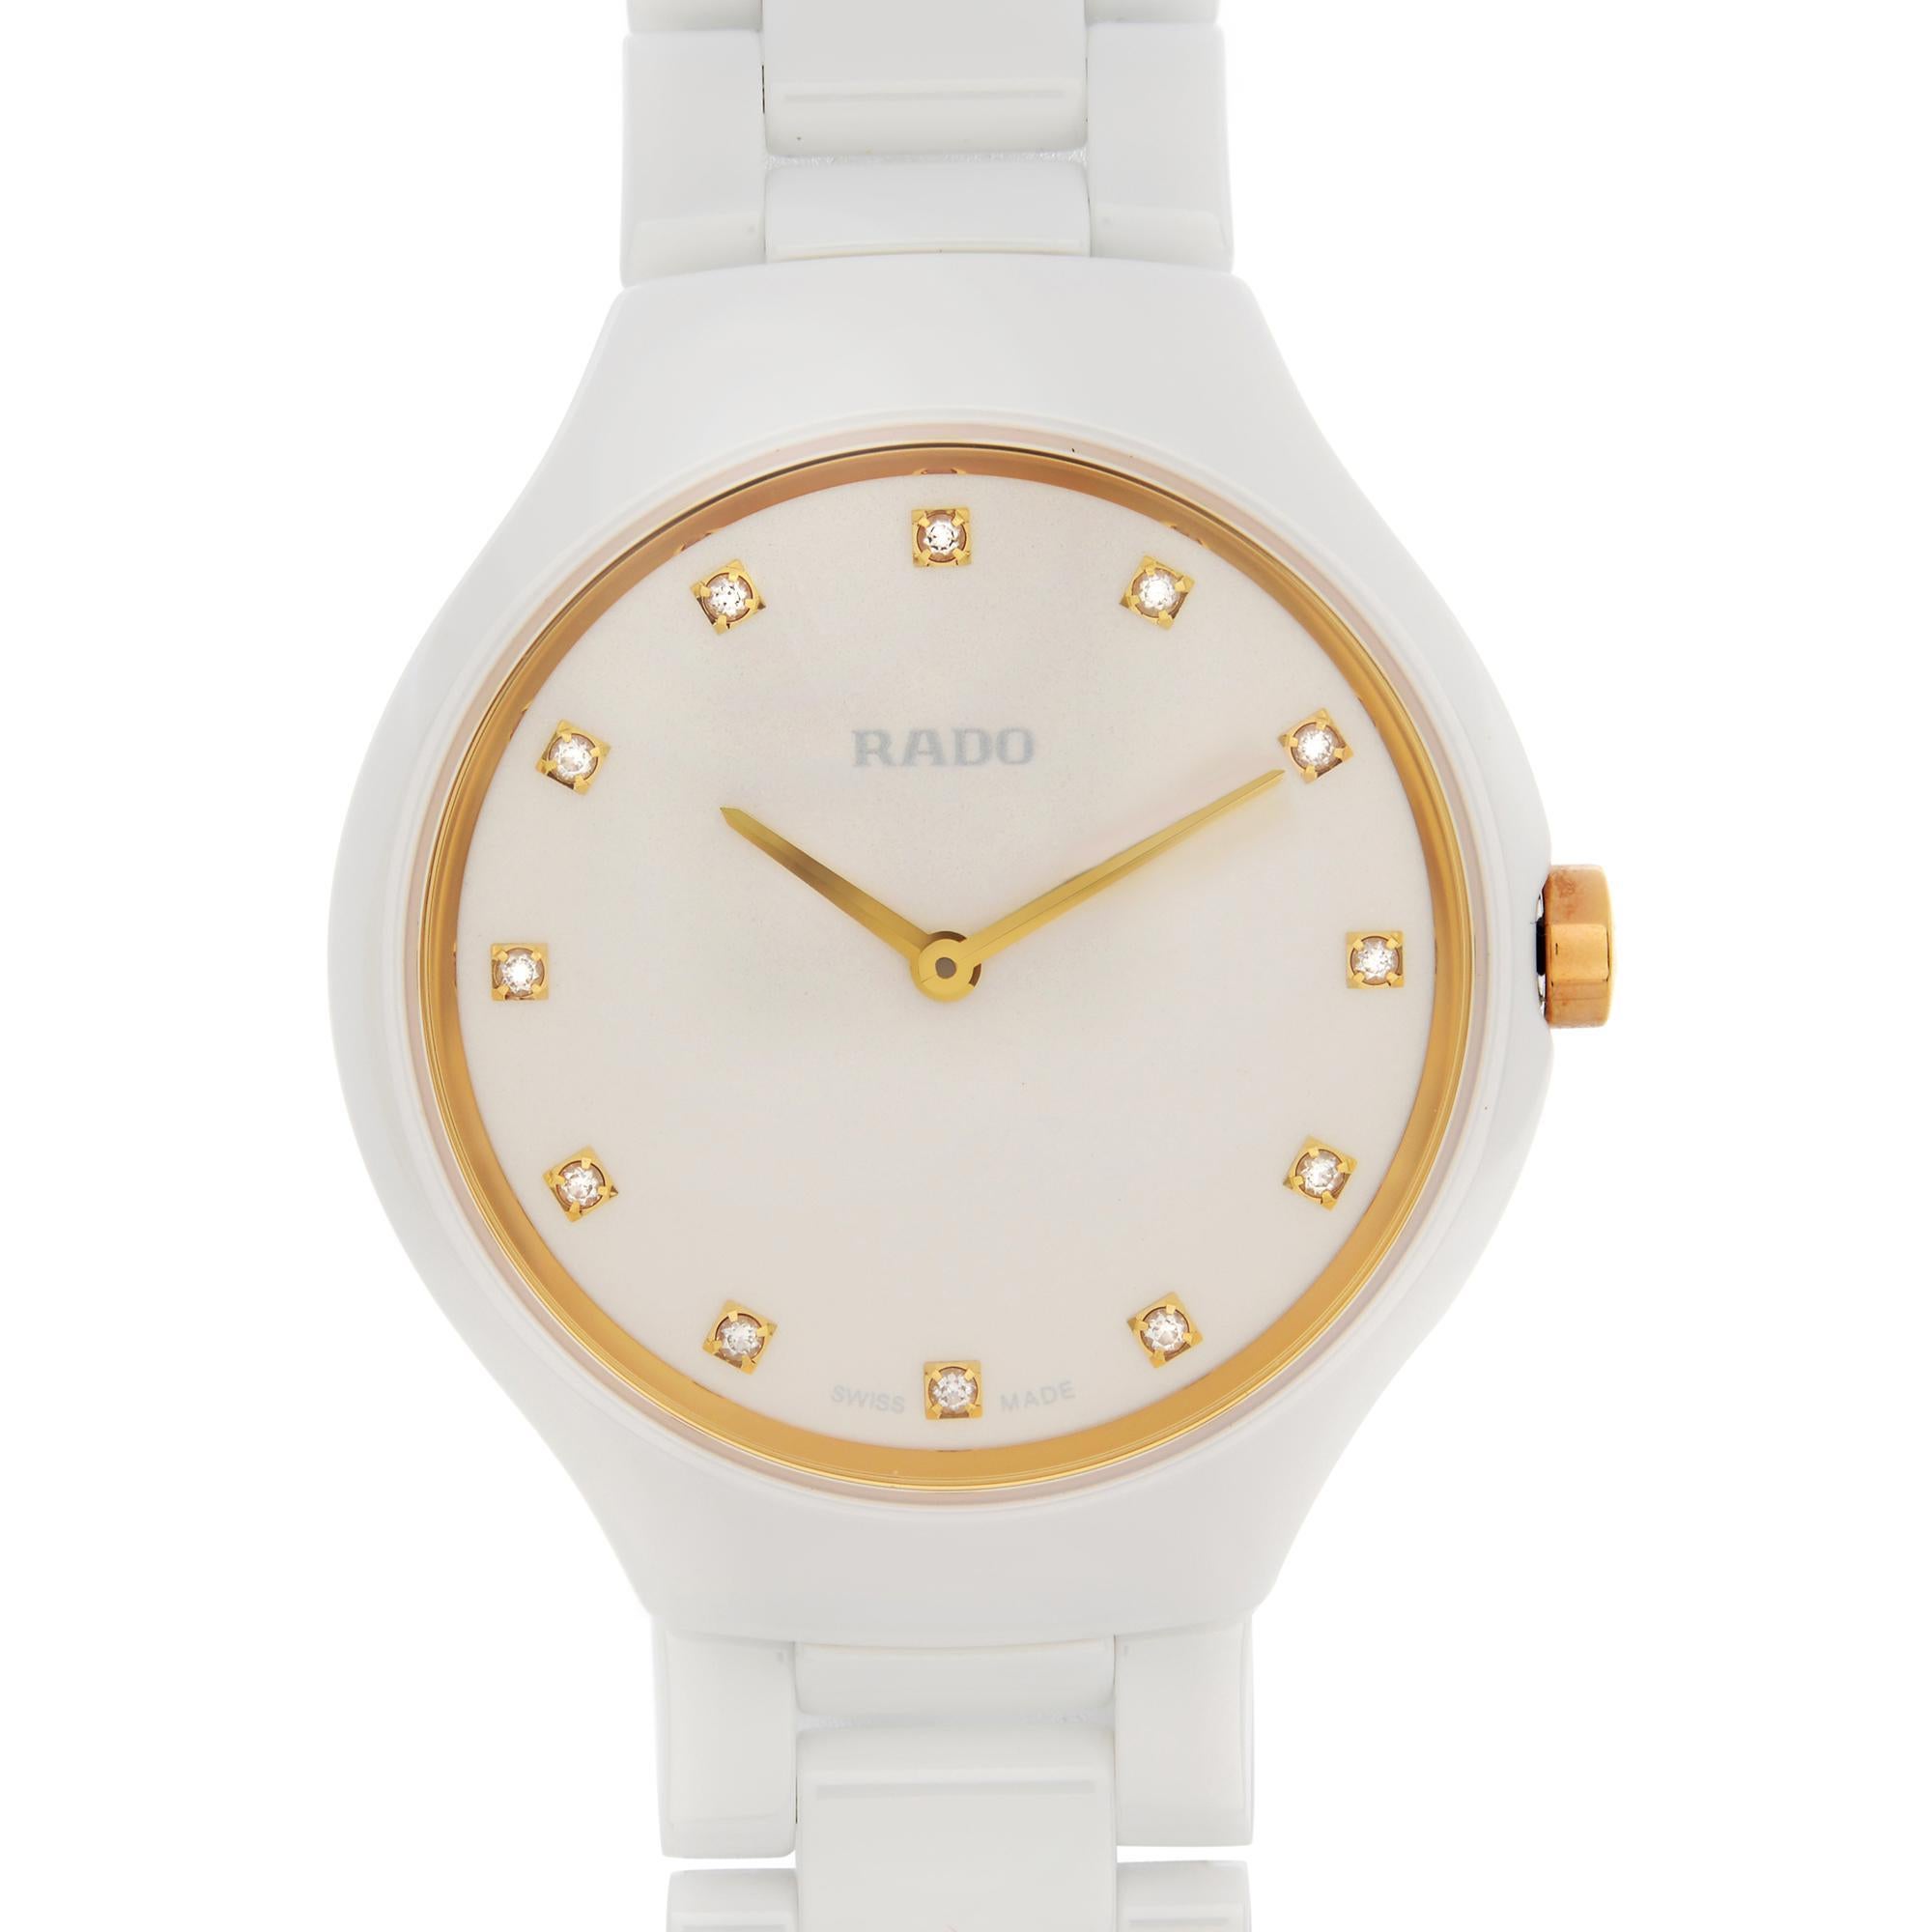 Display Model Rado True Thinline 30mm Ceramic White Diamond Dial Ladies Quartz Watch R27958709. This Beautiful Timepiece Features: White Ceramic Case with a White Ceramic Bracelet. Fixed Ceramic Bezel. White Dial with Rose Gold-tone Hands, And